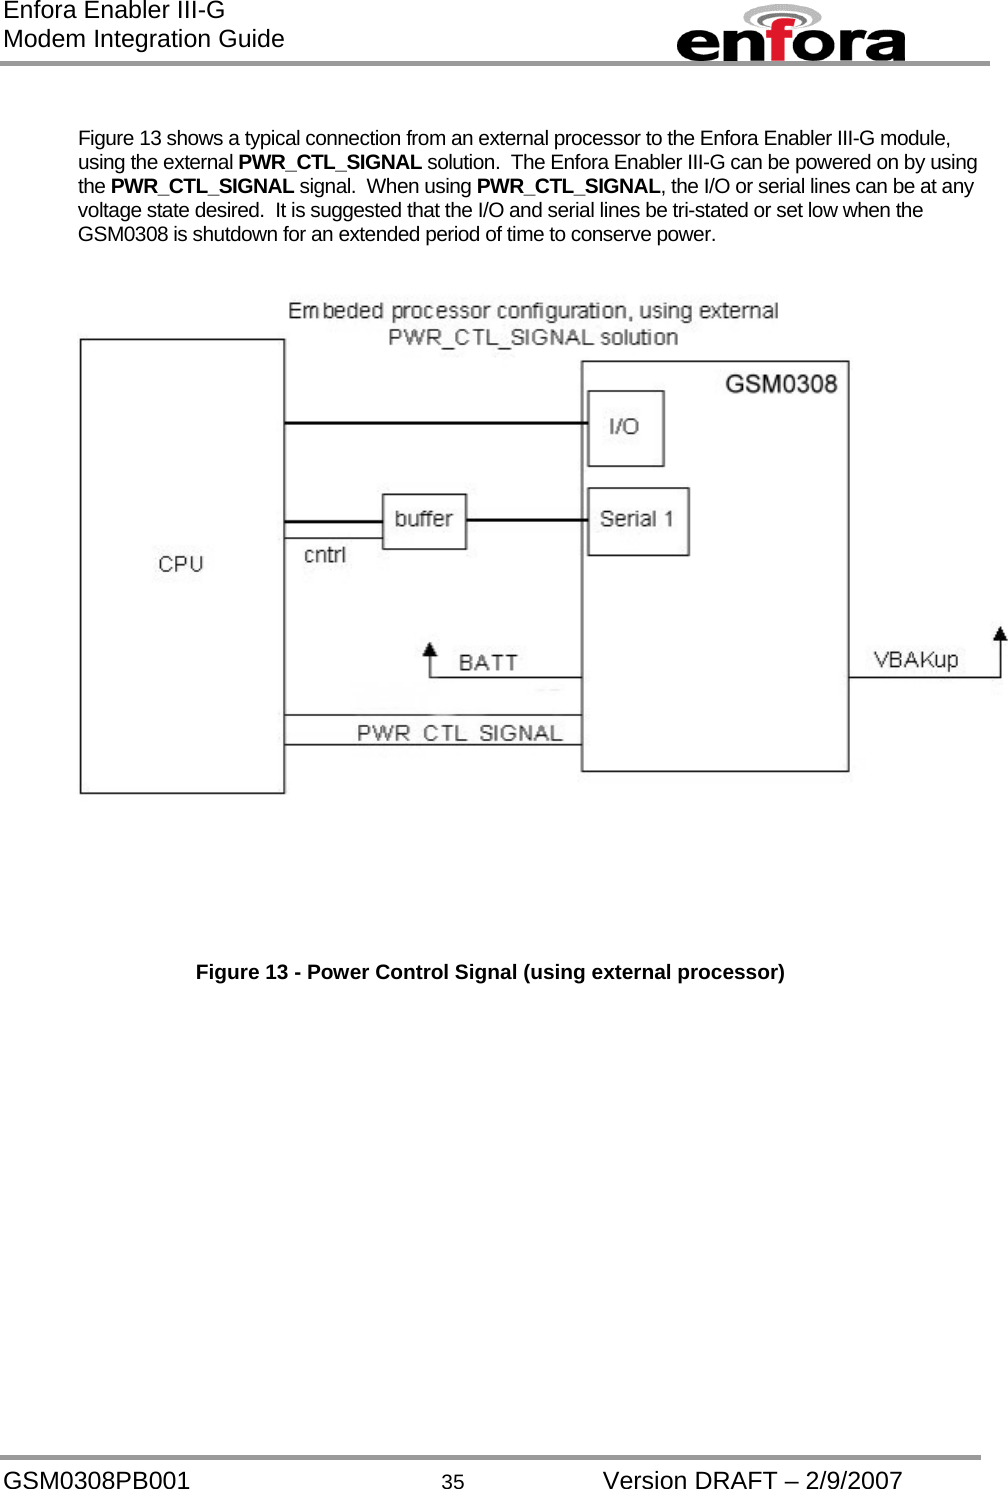 Enfora Enabler III-G Modem Integration Guide  Figure 13 shows a typical connection from an external processor to the Enfora Enabler III-G module, using the external PWR_CTL_SIGNAL solution.  The Enfora Enabler III-G can be powered on by using the PWR_CTL_SIGNAL signal.  When using PWR_CTL_SIGNAL, the I/O or serial lines can be at any voltage state desired.  It is suggested that the I/O and serial lines be tri-stated or set low when the GSM0308 is shutdown for an extended period of time to conserve power.    Figure 13 - Power Control Signal (using external processor) GSM0308PB001  35  Version DRAFT – 2/9/2007 